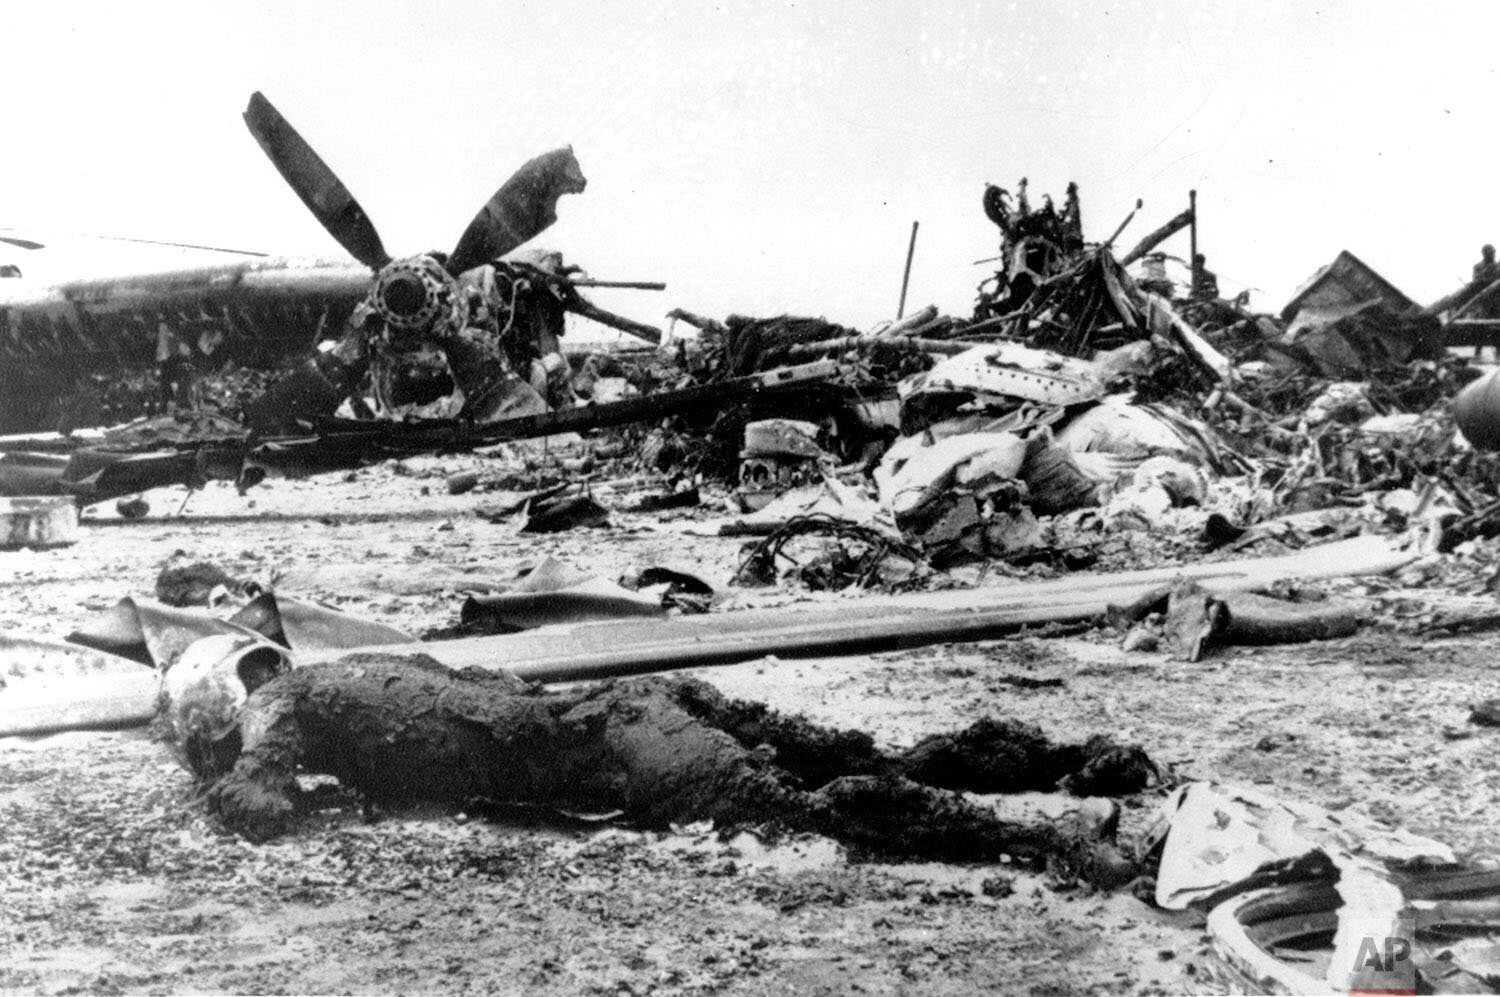  A charred body lies within the scorched wreckage of an American C-130 Cargo aircraft  in the Iranian desert of Dasht-E-Kavir, approximately 500 kilometers from Tehran, on April 27, 1980. The mission to free 50 American hostages from the U.S. Embassy